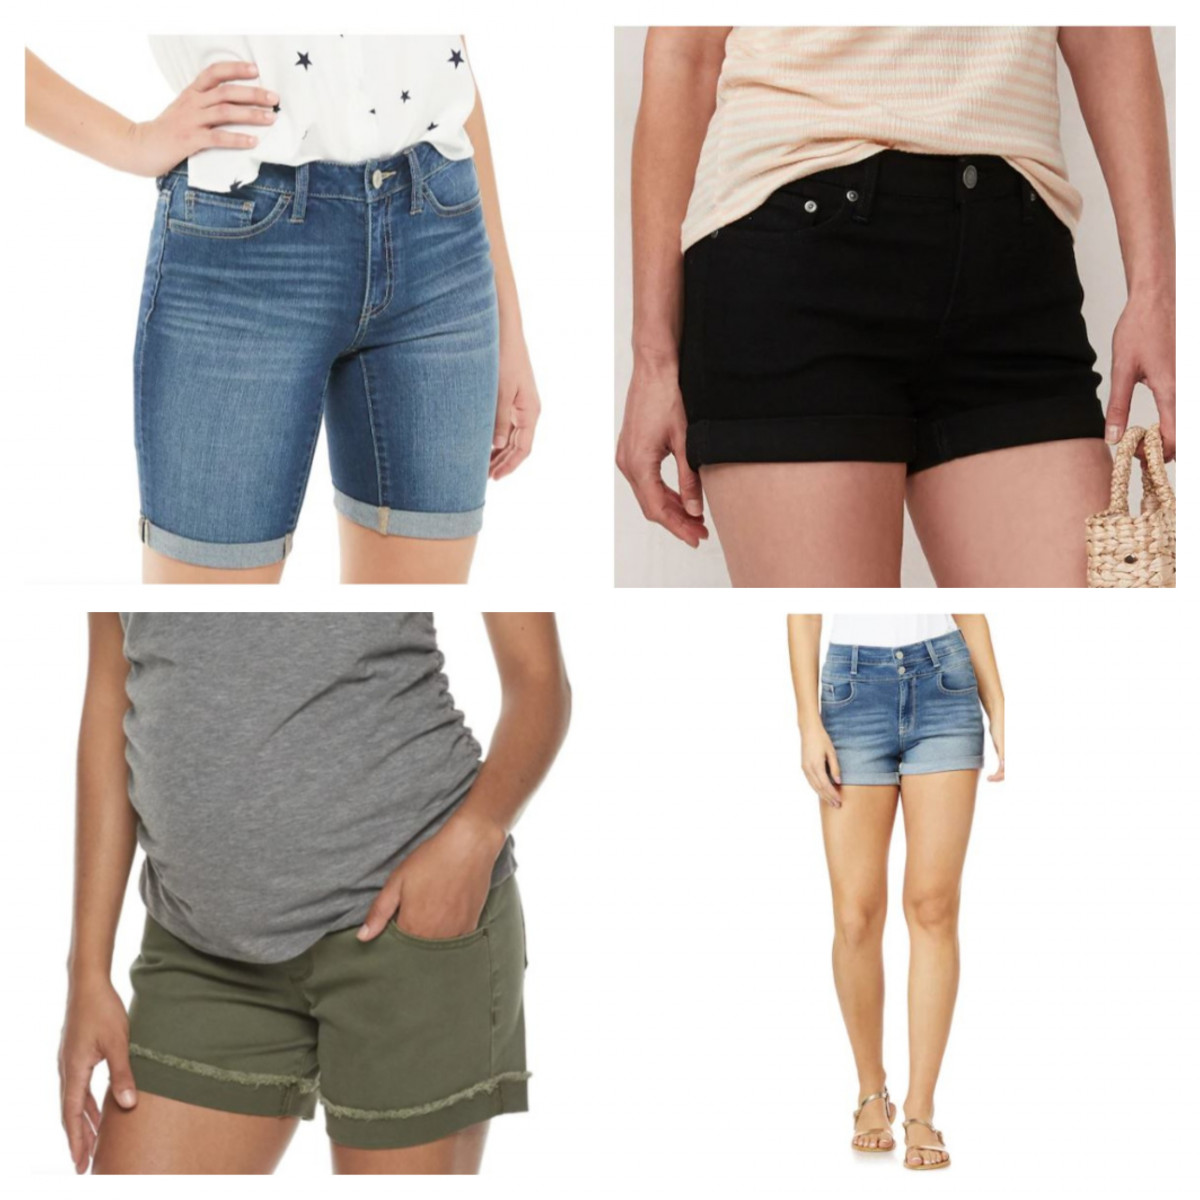 Alea's Deals Women’s Shorts on Sale starting at $14.40!  